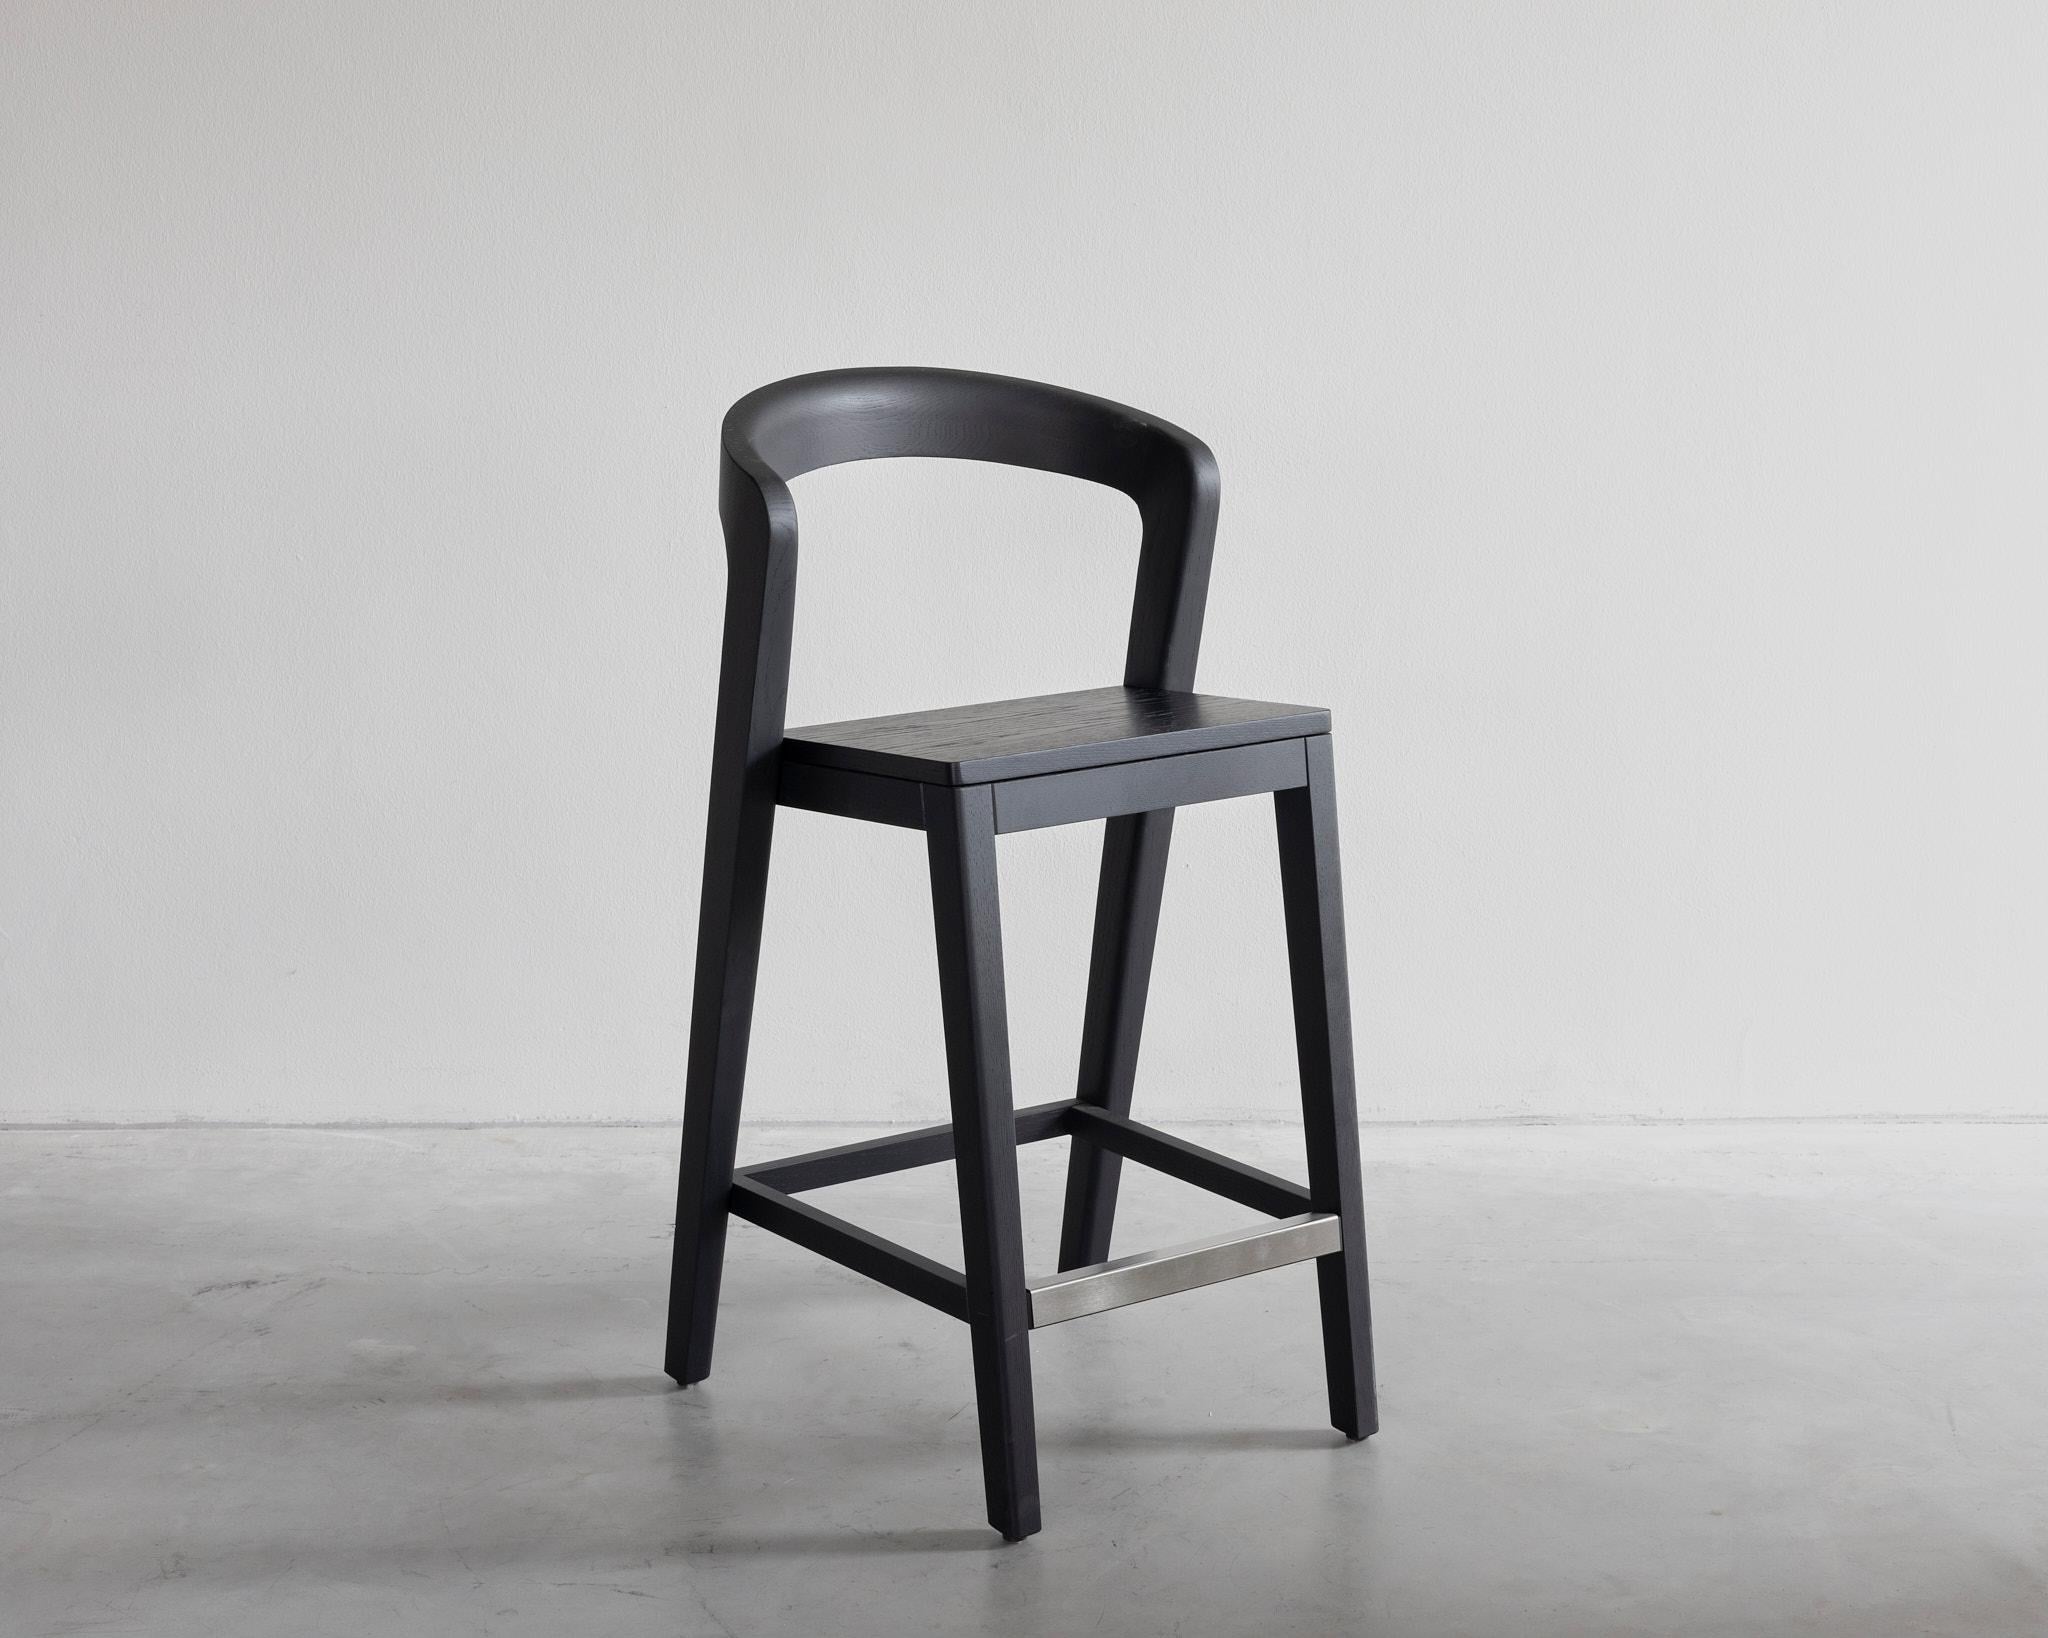 Play Barstool by Van Rossum
Dimensions: D 55 x W 48 x H 103 cm
Materials: Wooden Tablet, Walnut.
Other options available. Please contact us.

For over 40 years, Van Rossum has designed and handmade solid and sustainable furniture from the workshop